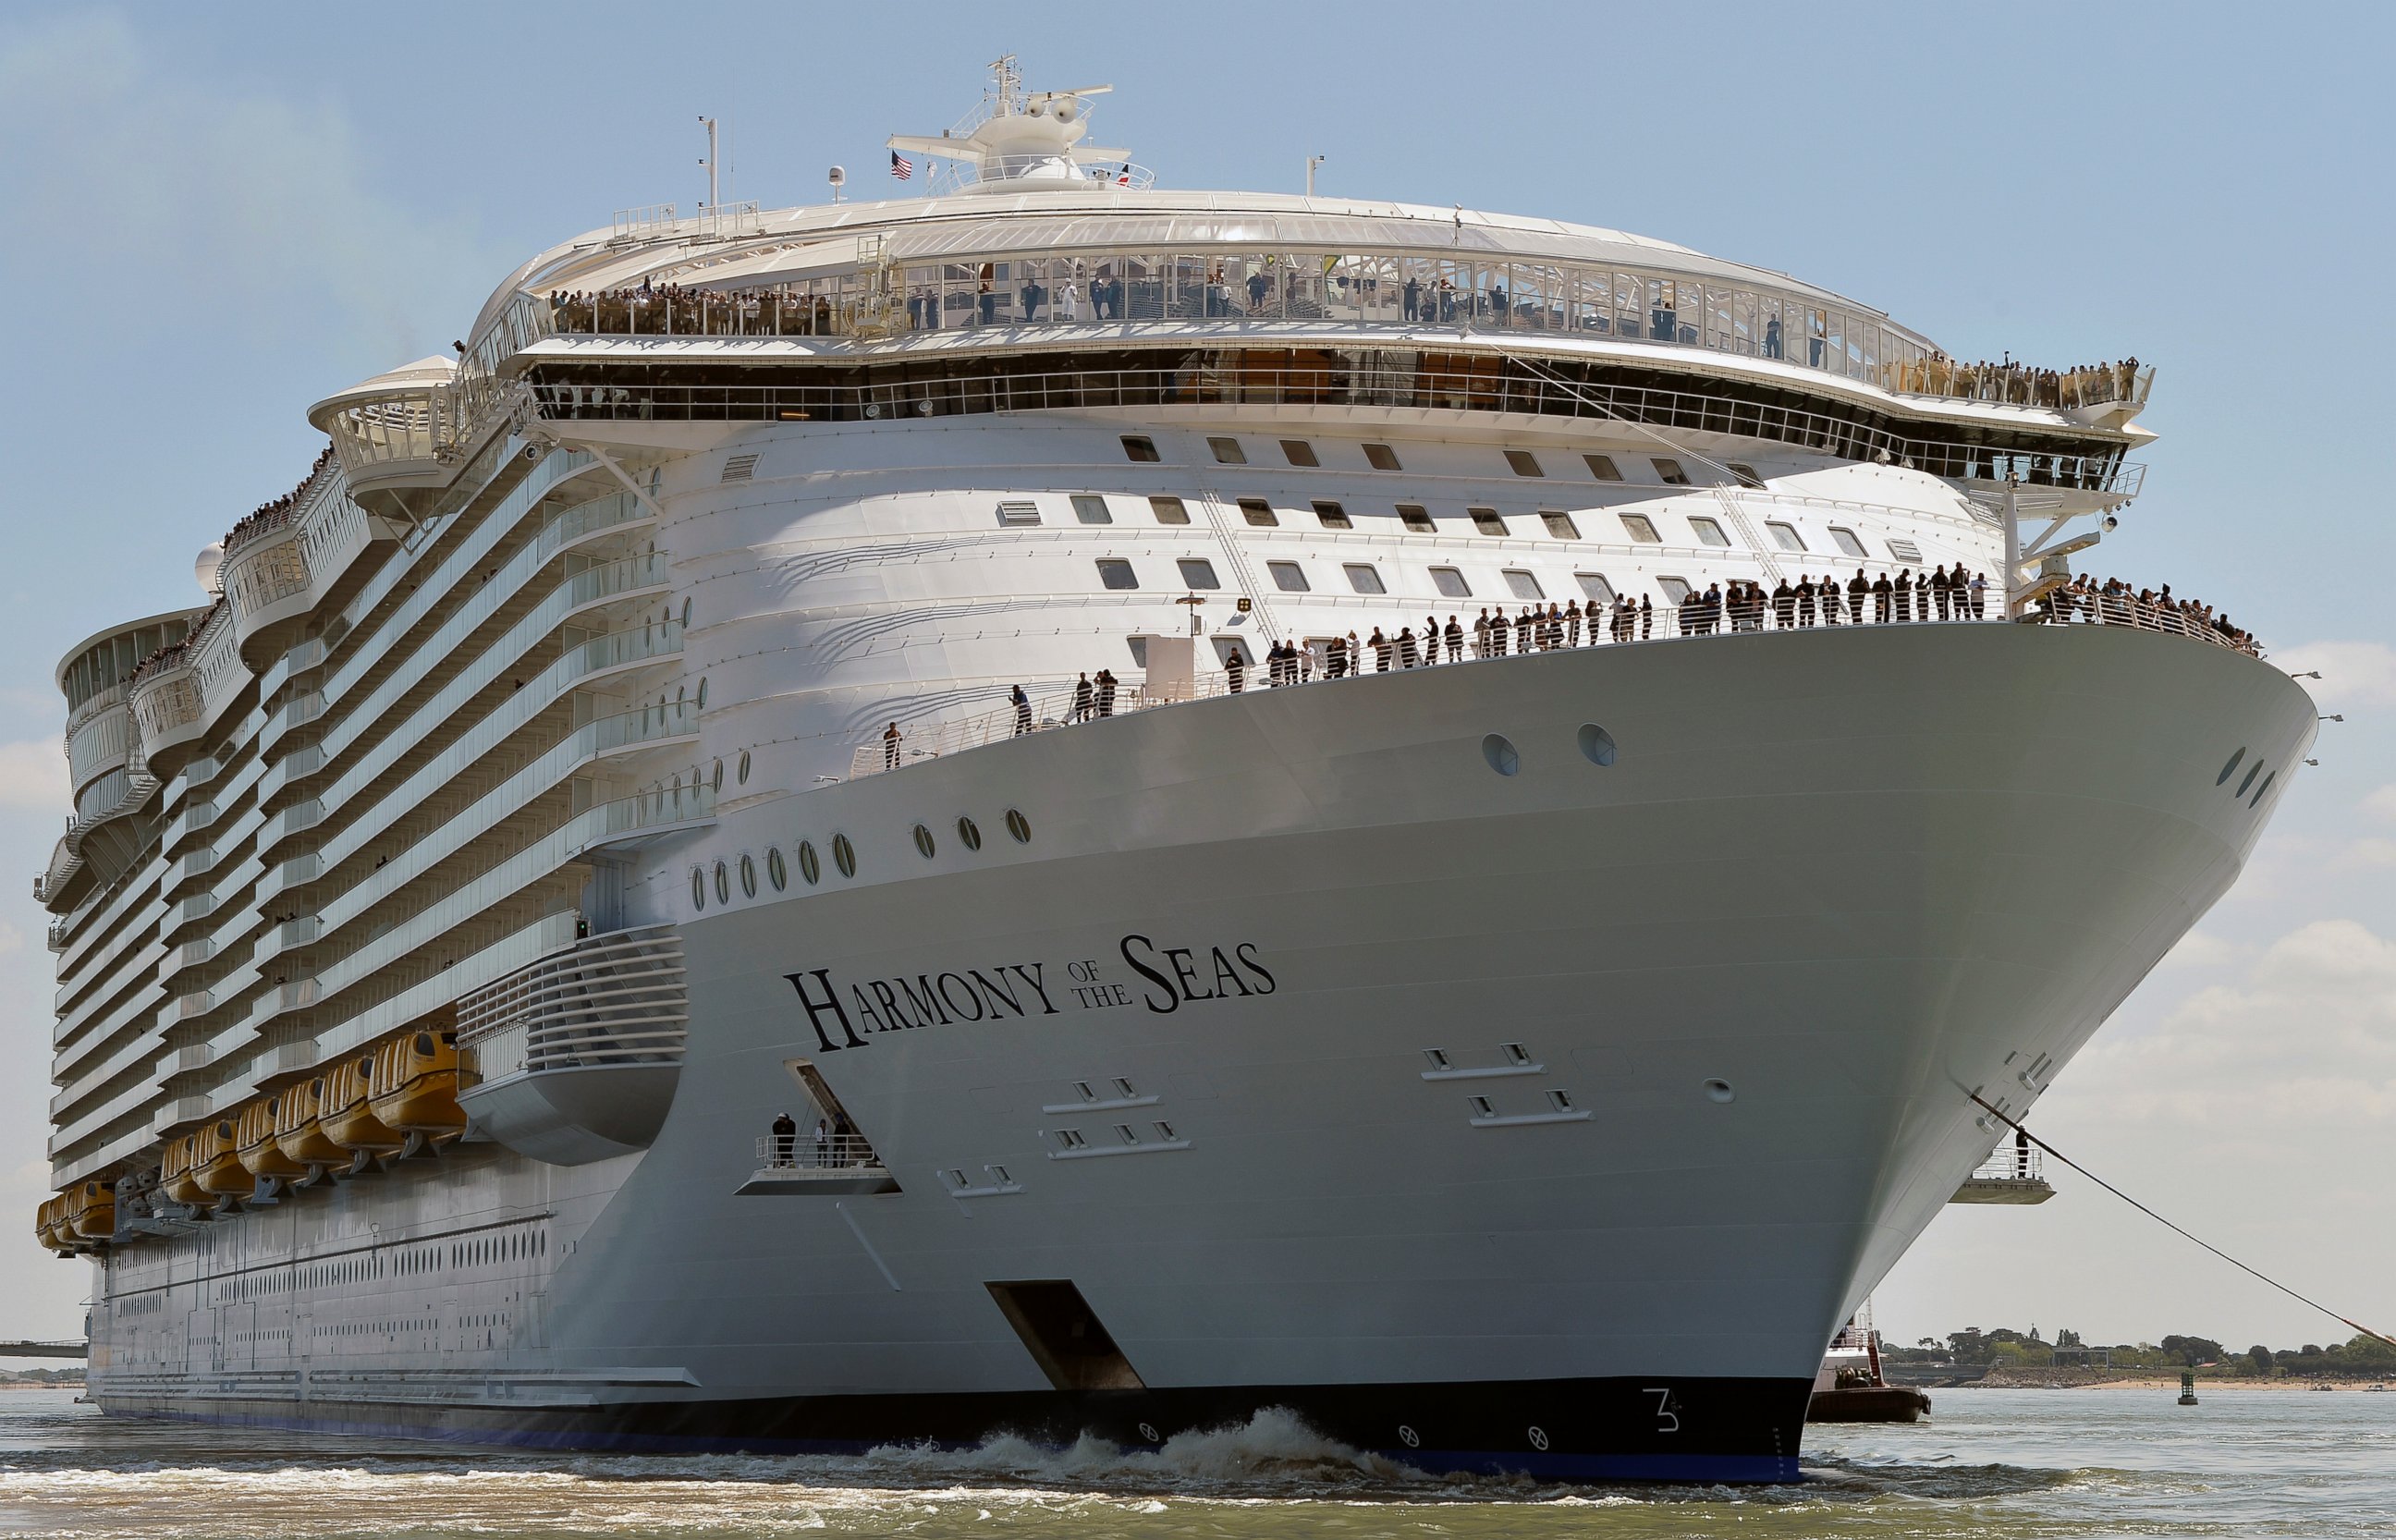 PHOTO: A photo taken on May 15, 2016 shows the Harmony of the Seas cruise ship as it sails from the STX Saint-Nazaire shipyard, western France, out to sea. 